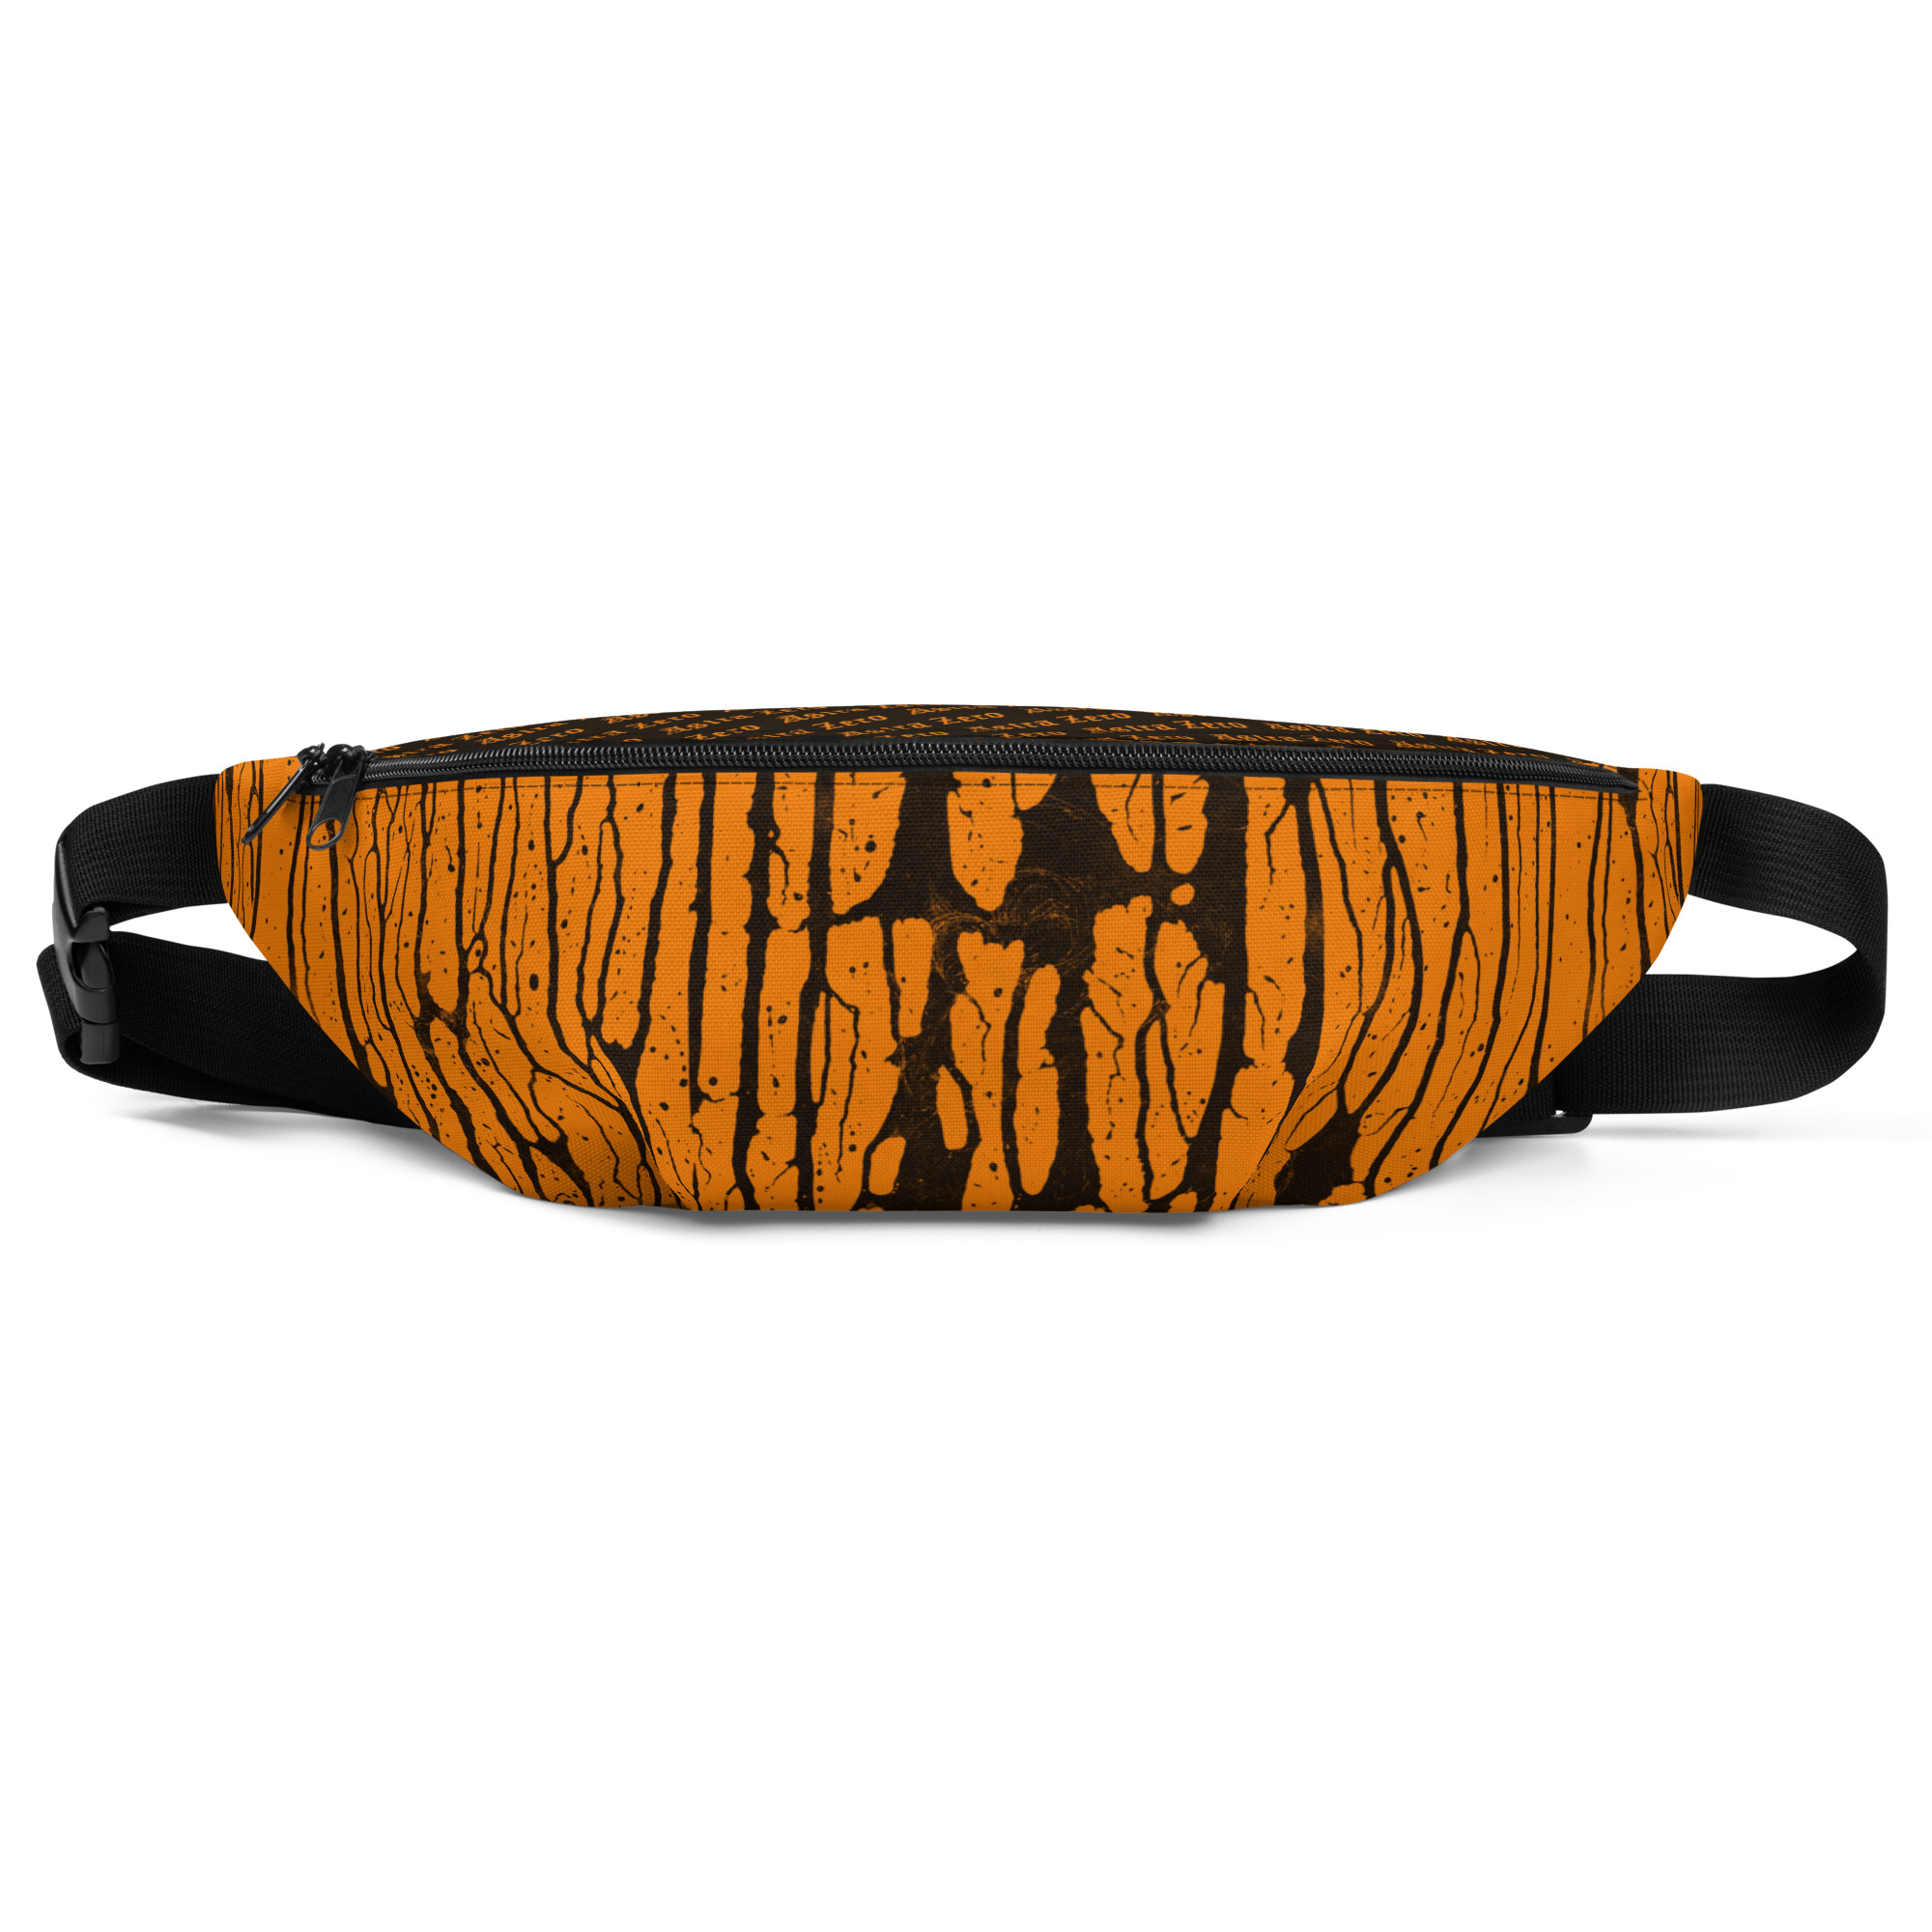 Featured image for “Orange Grunge Drip - Fanny Pack”